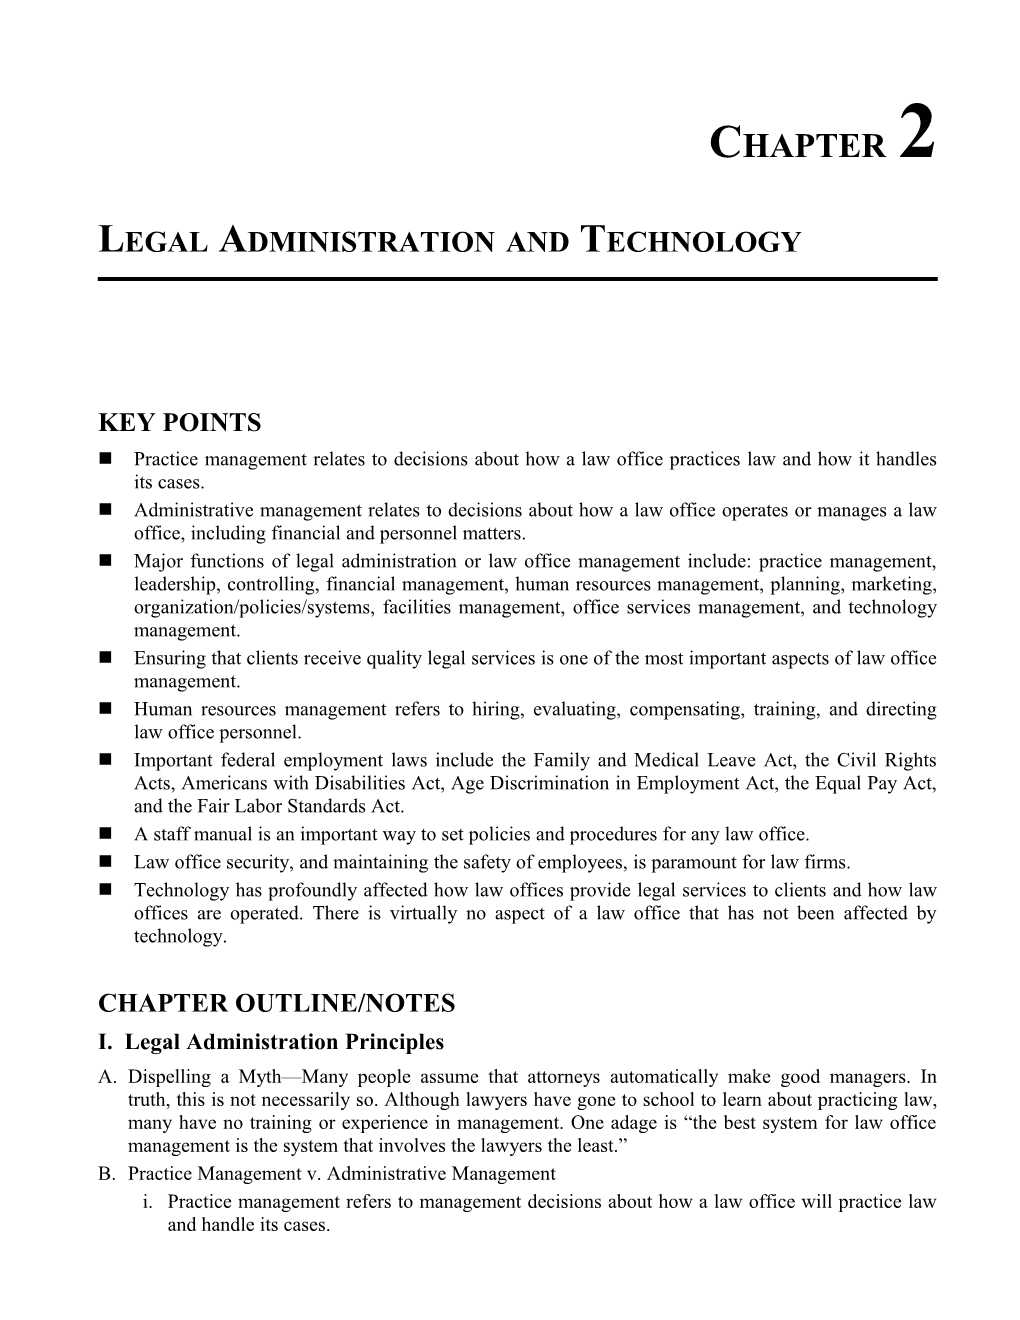 Legal Administration and Technology